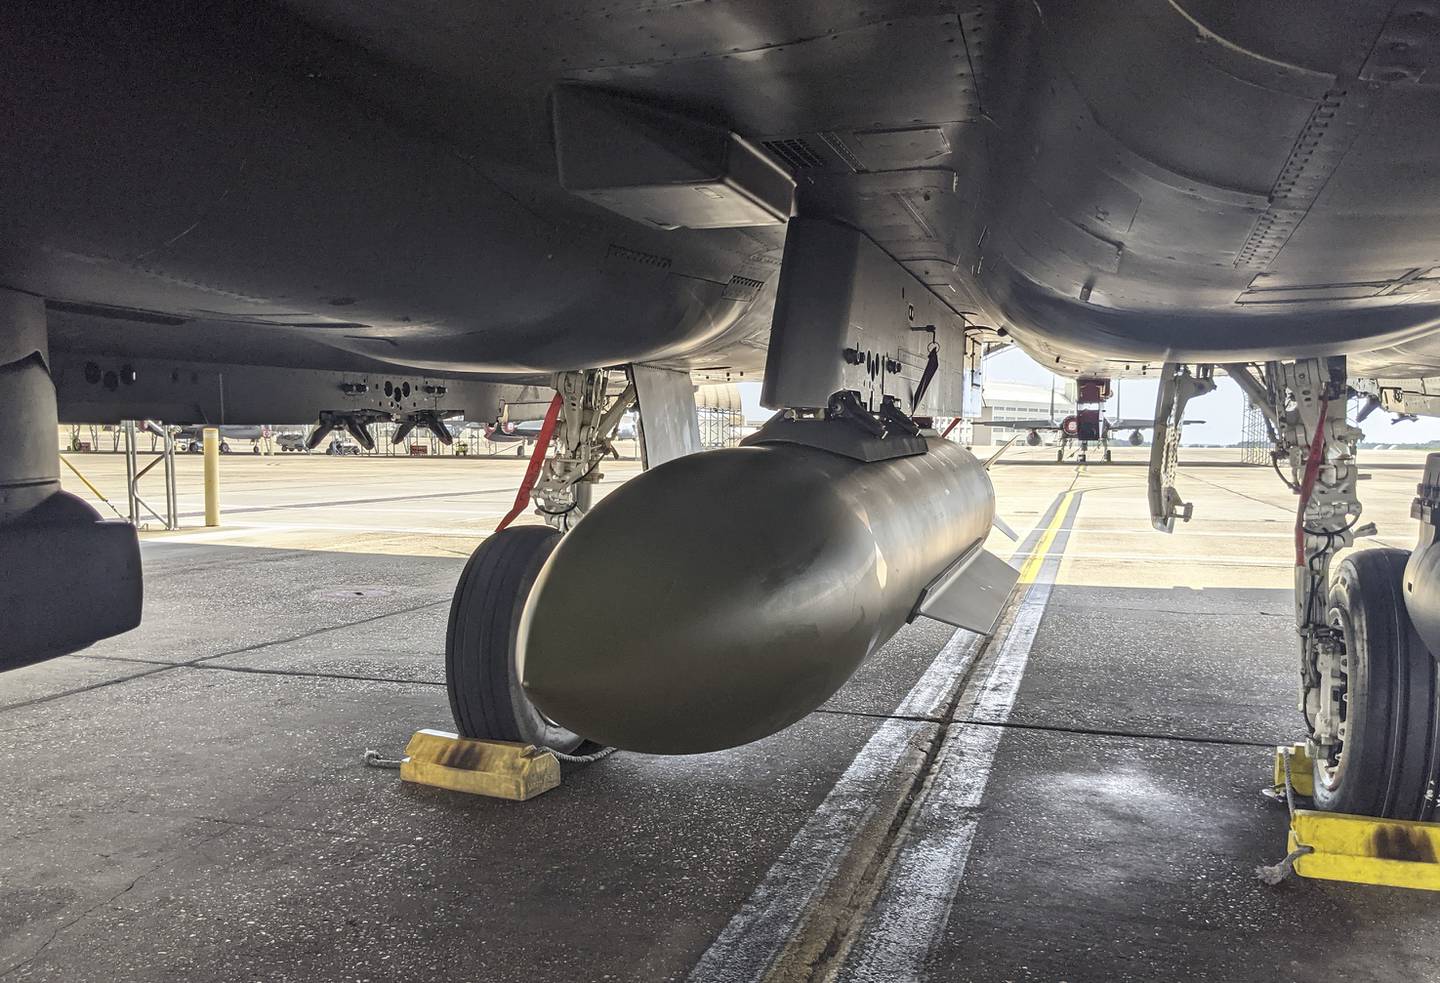 The 96th Test Wing recently concluded a GBU-72 test series that featured the first-ever load, flight and release of the 5,000-pound weapon. (Air Force)